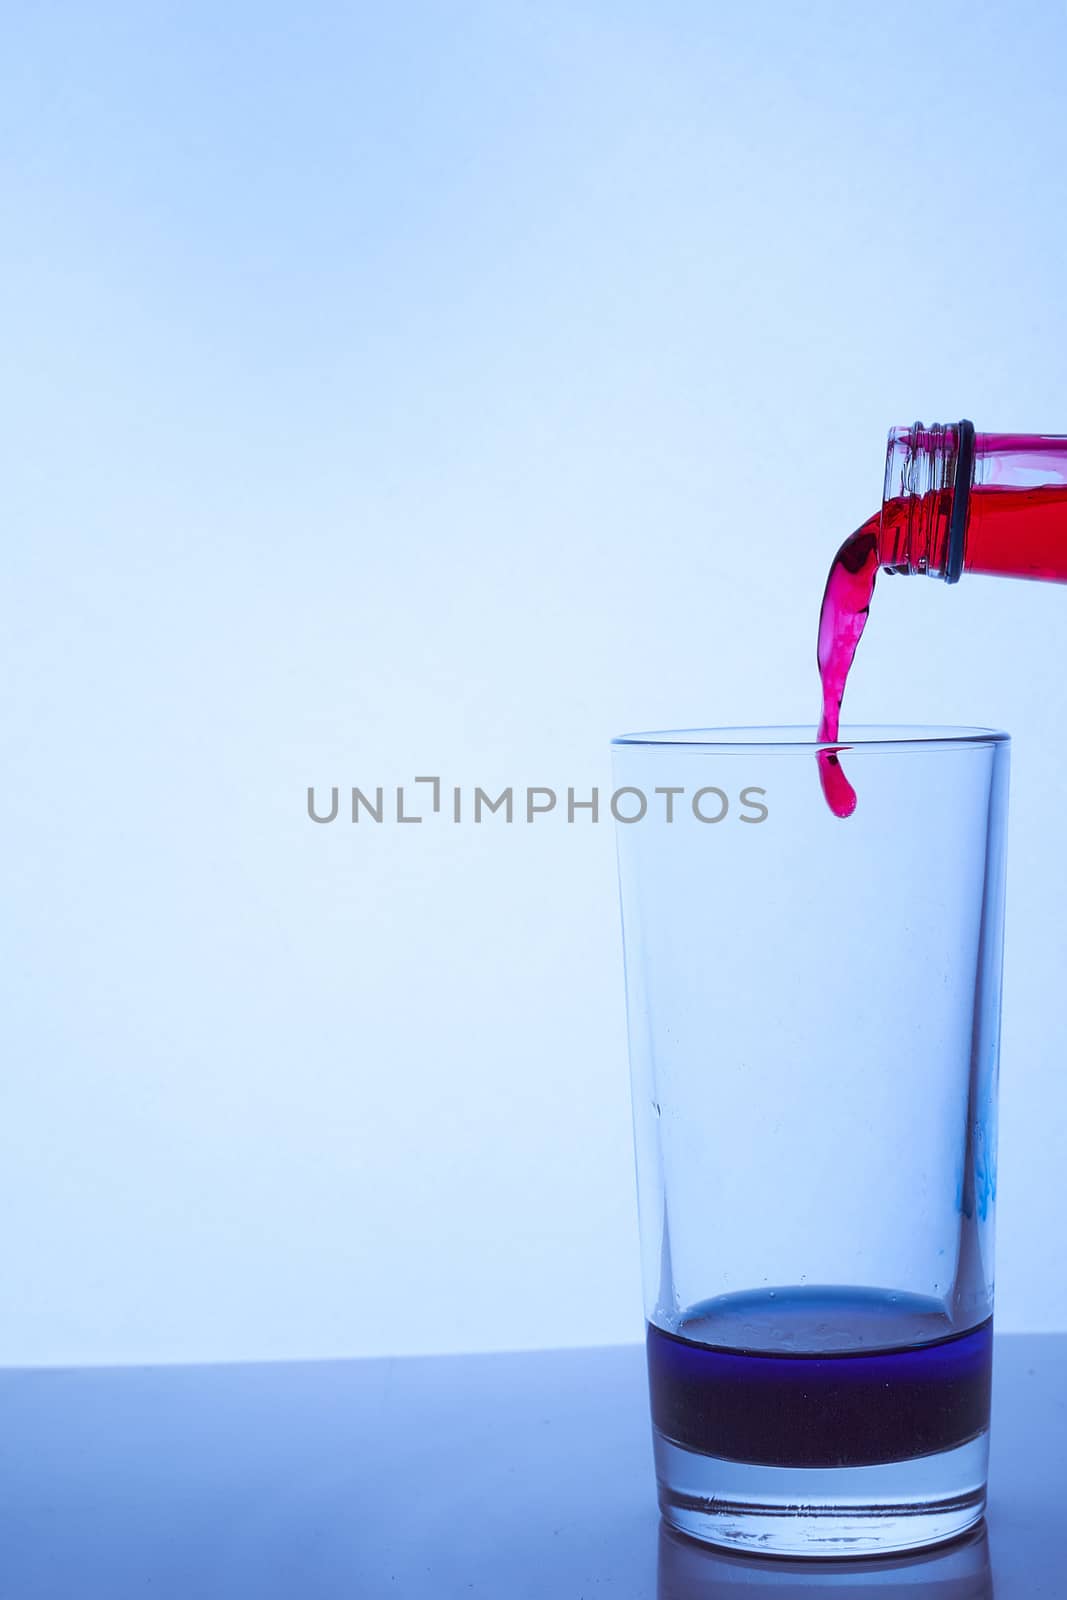 pour red wine into a glass cup with blue liquid. Hight quality photo